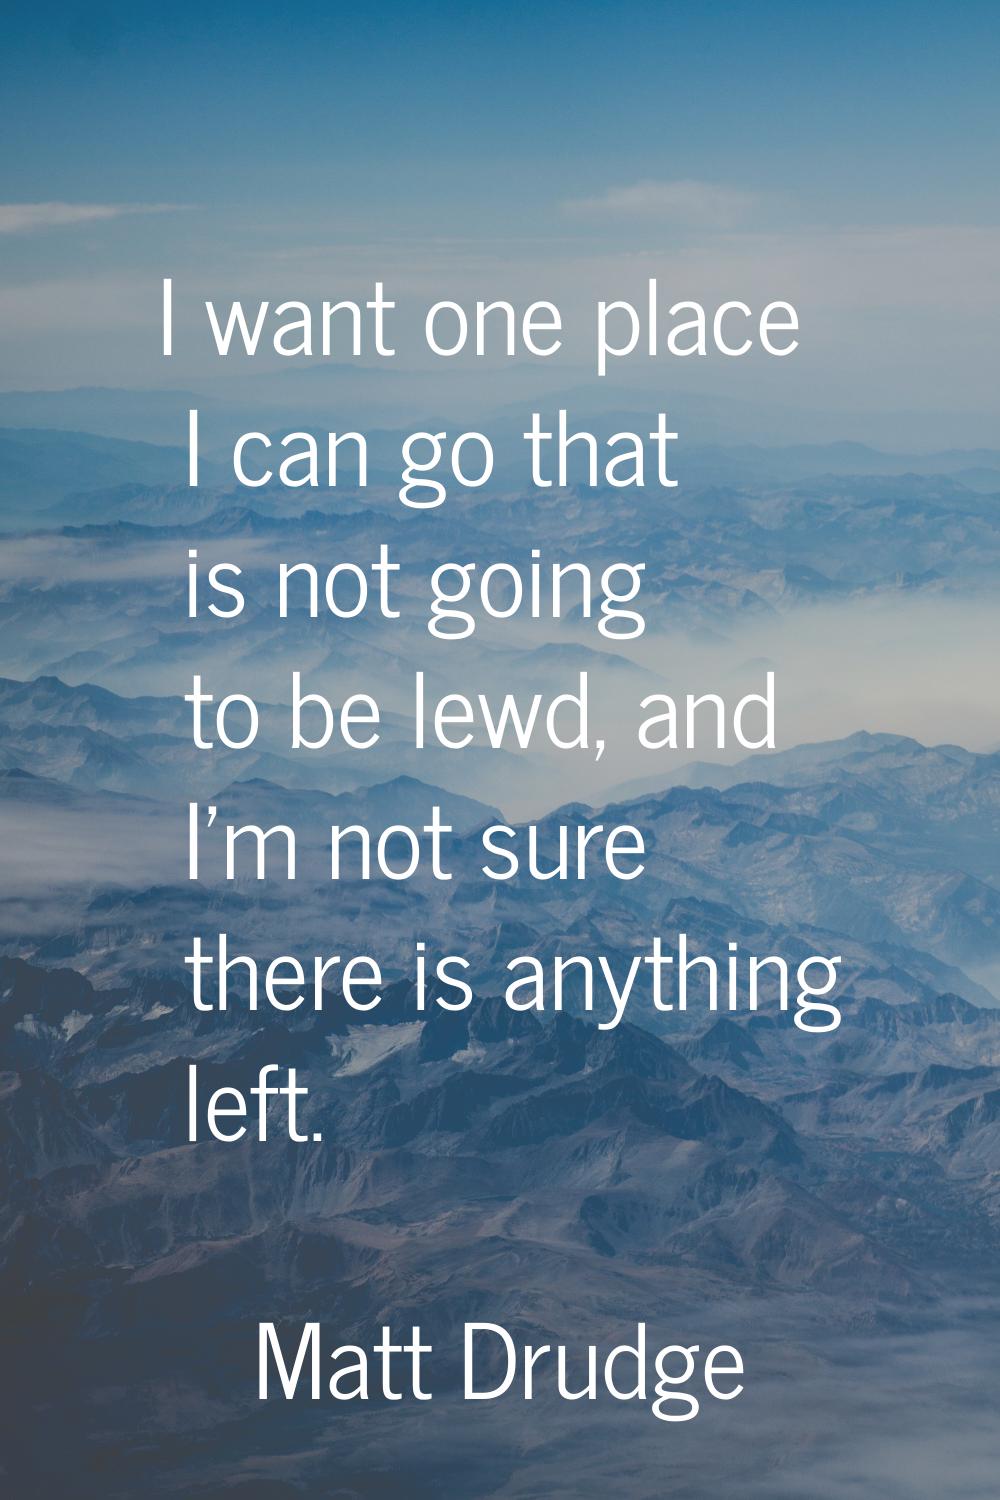 I want one place I can go that is not going to be lewd, and I'm not sure there is anything left.